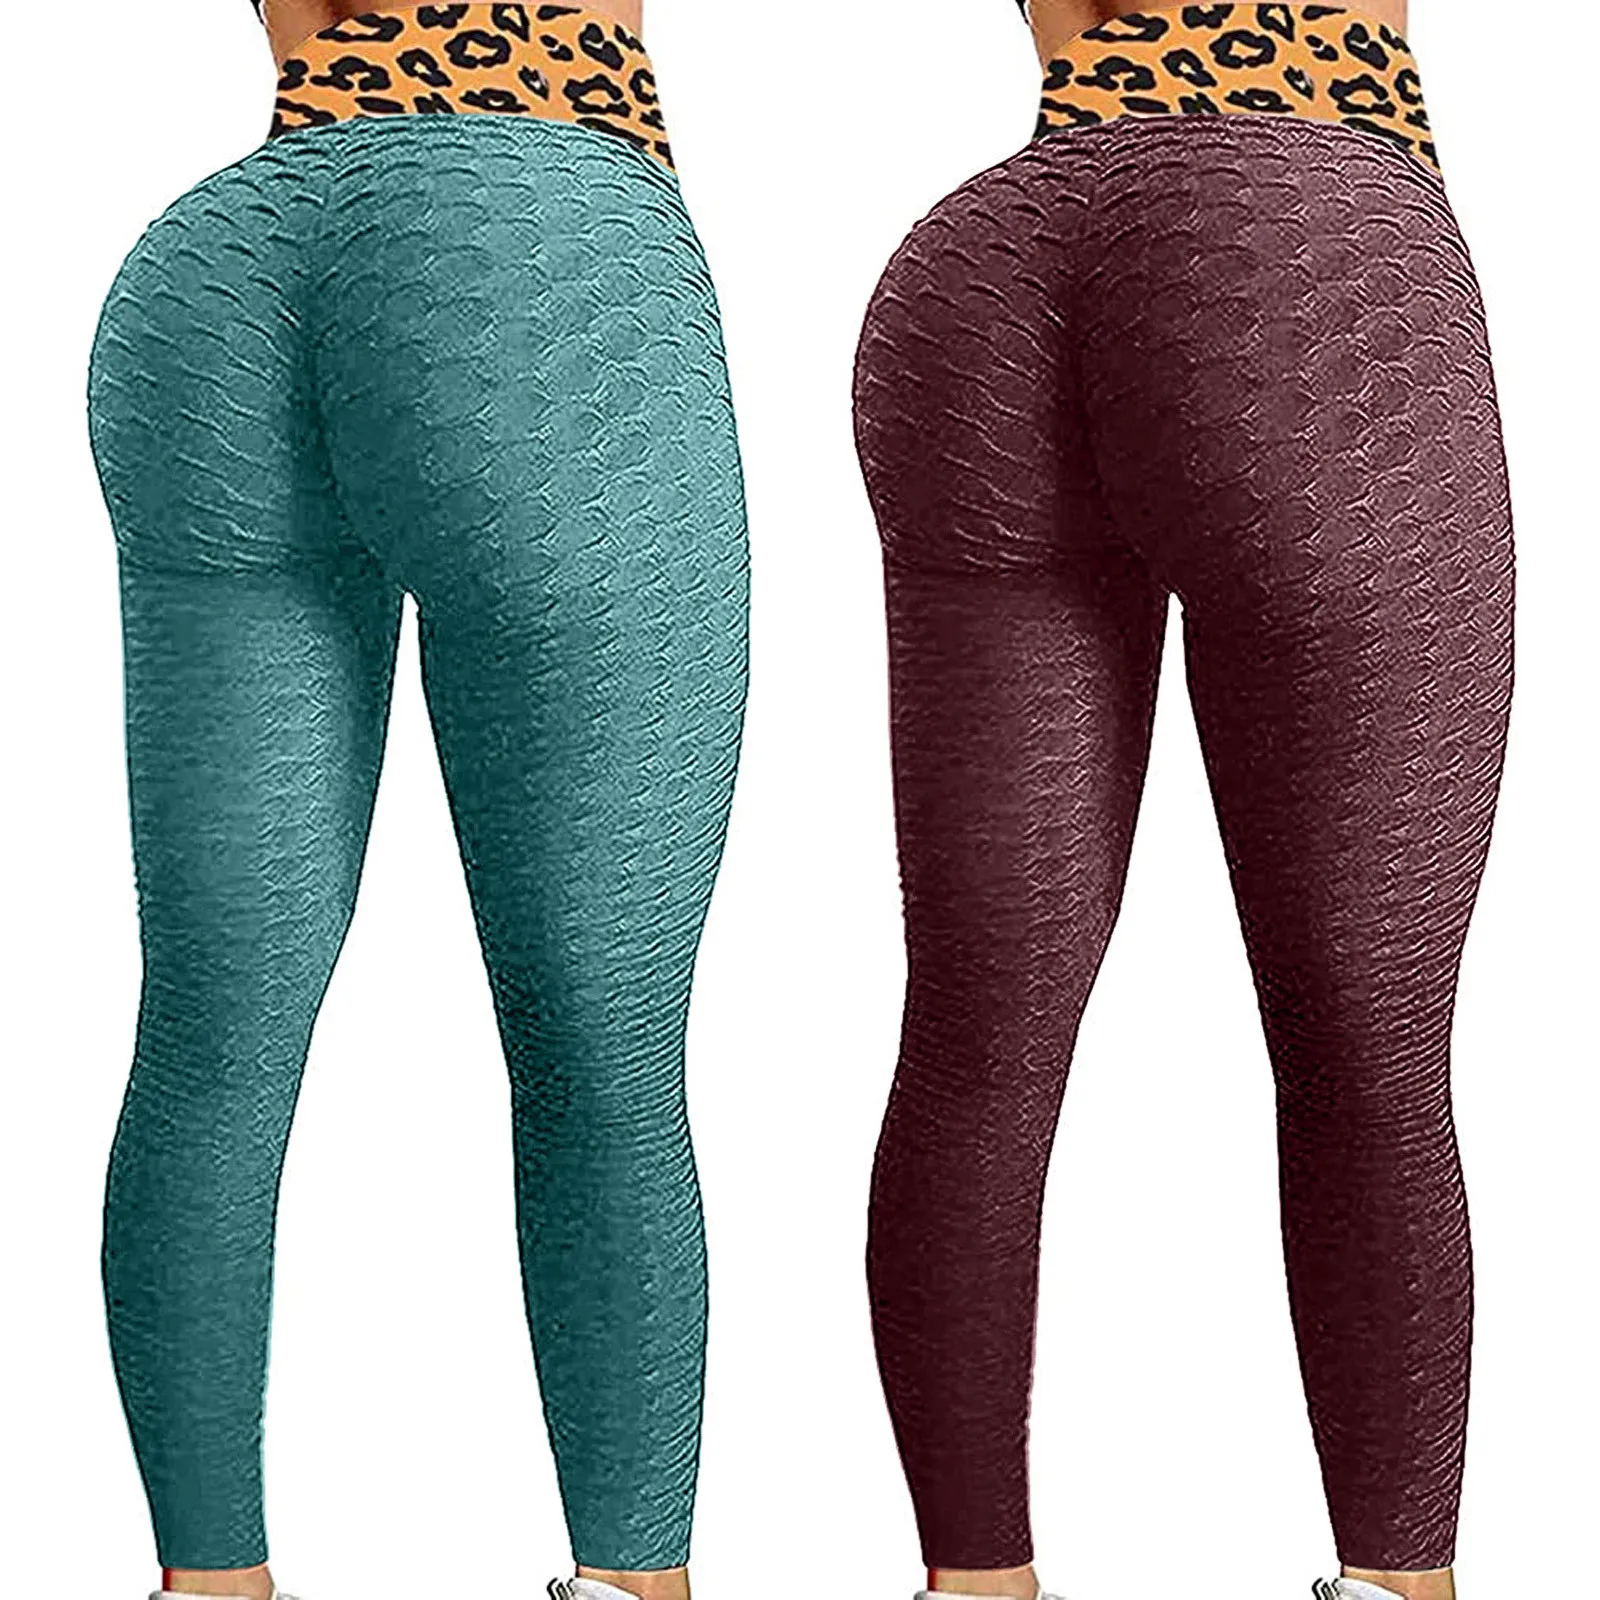 

Gym Seamless Leggings Sport Women Fitness With High Waist Lycra Sporty Workout Yoga Pants Squat Proof Tummy Control Slim Tights